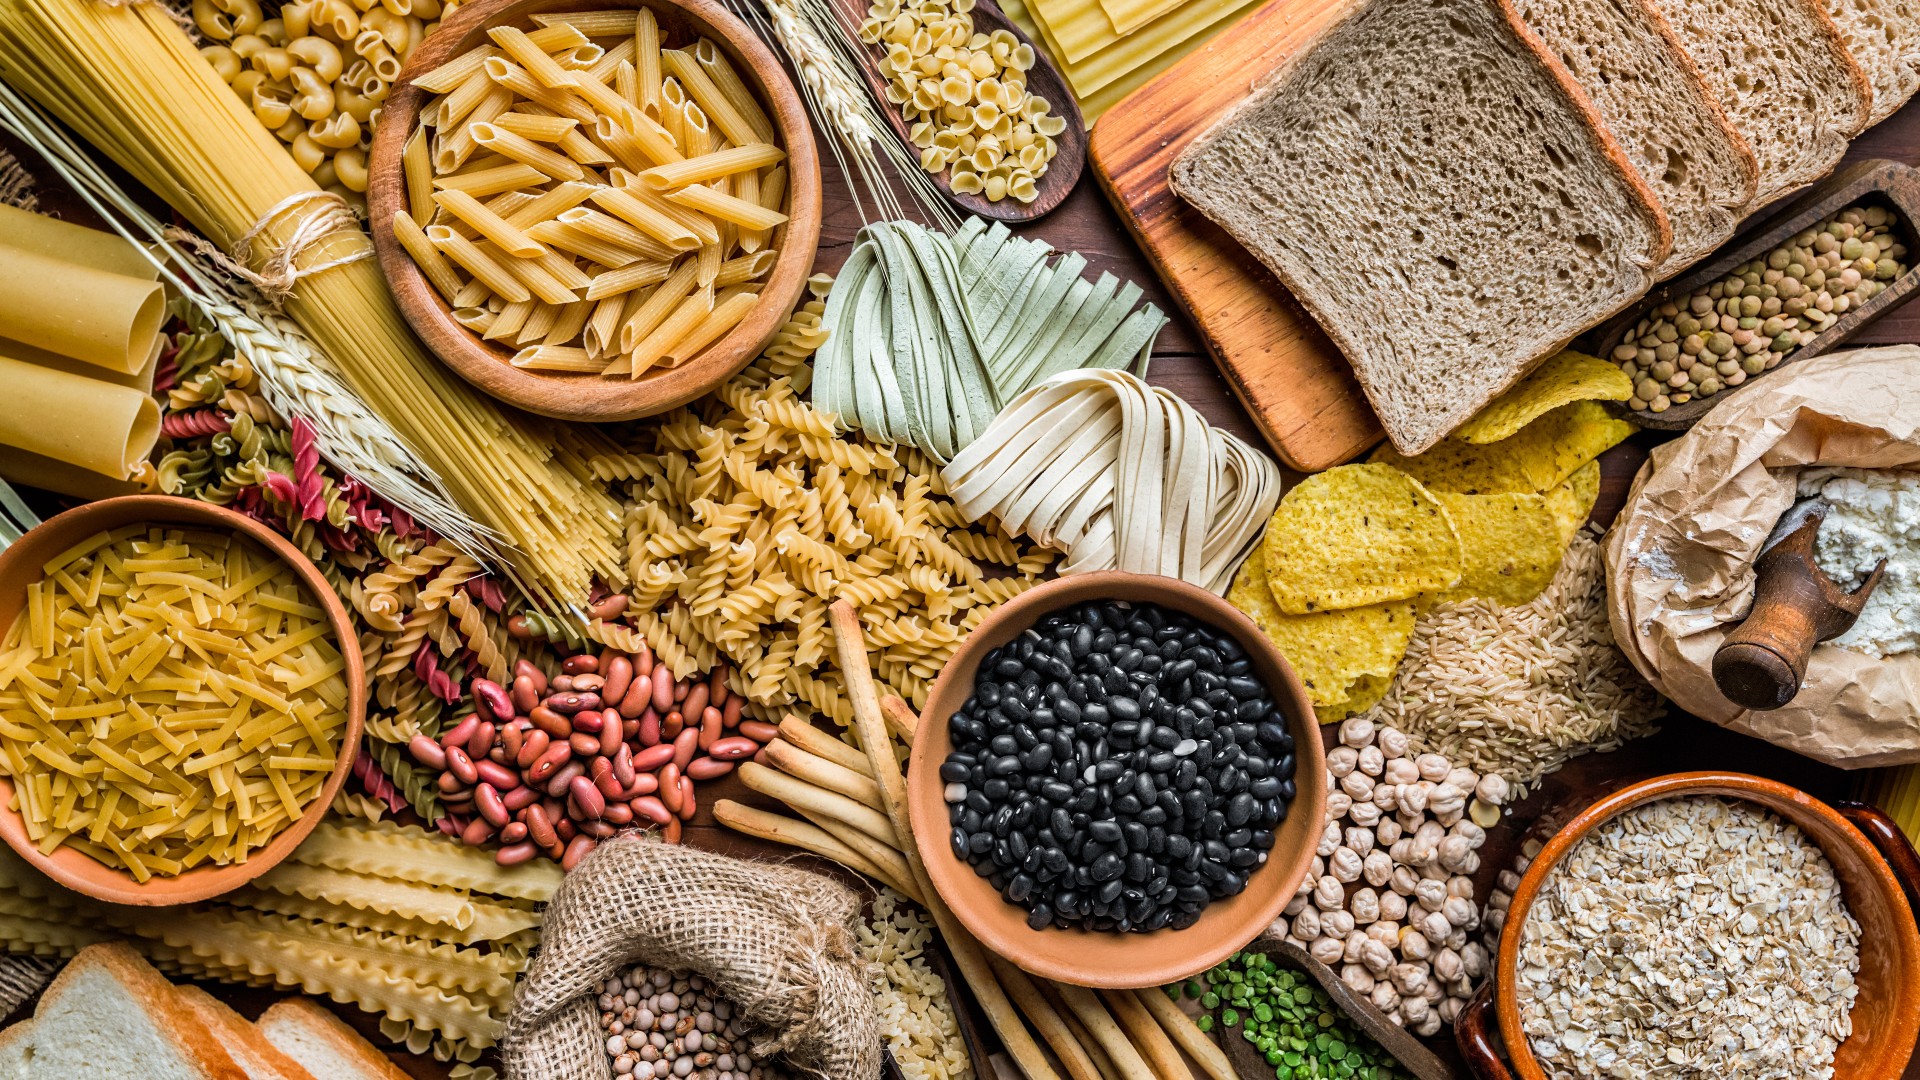 A spread of carbohydrates including rice and pasta